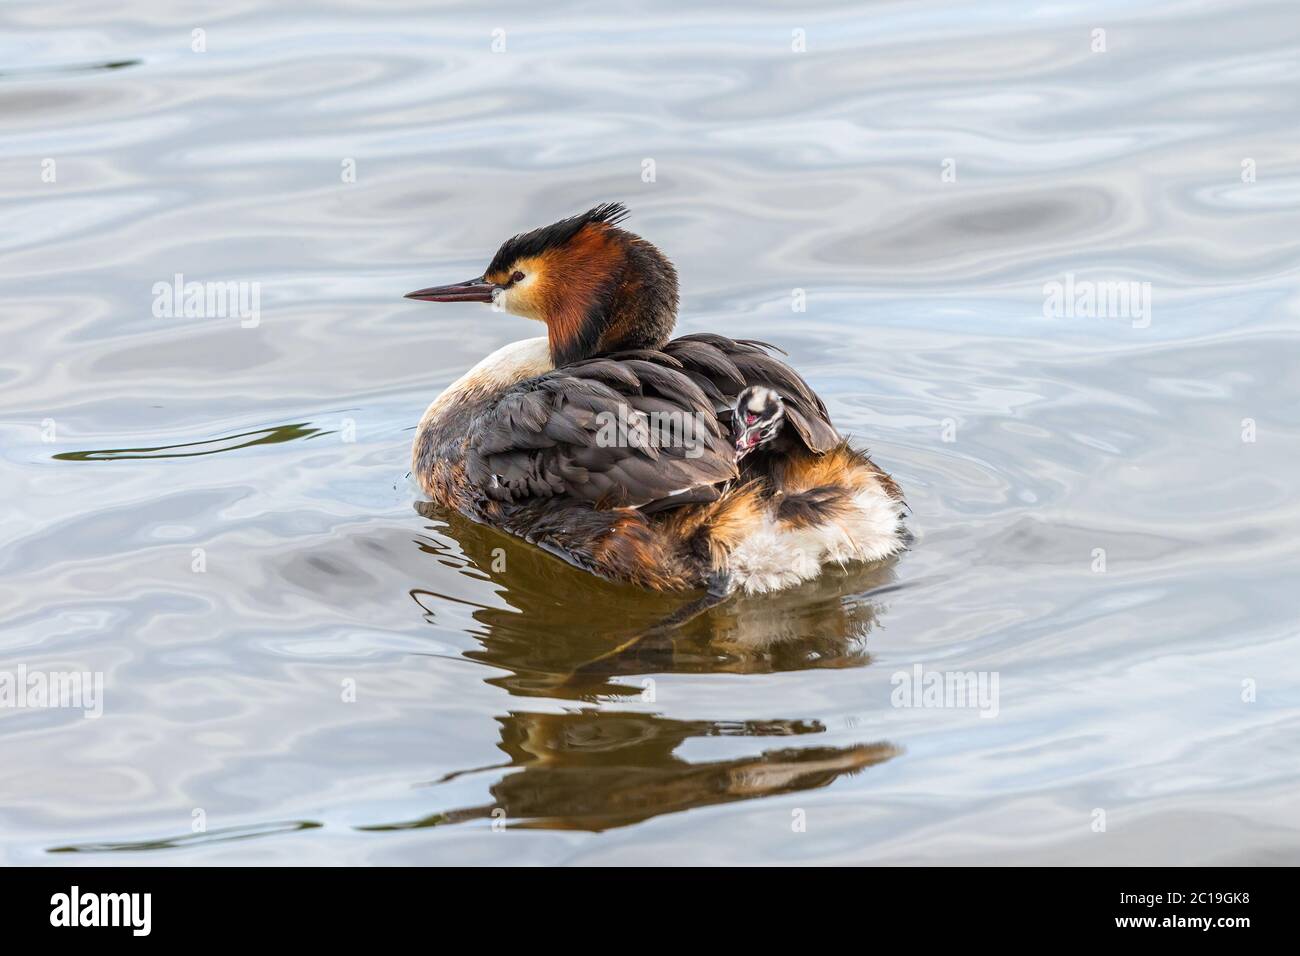 Crested Grebe with a young chick on the back swimming in the water Stock Photo